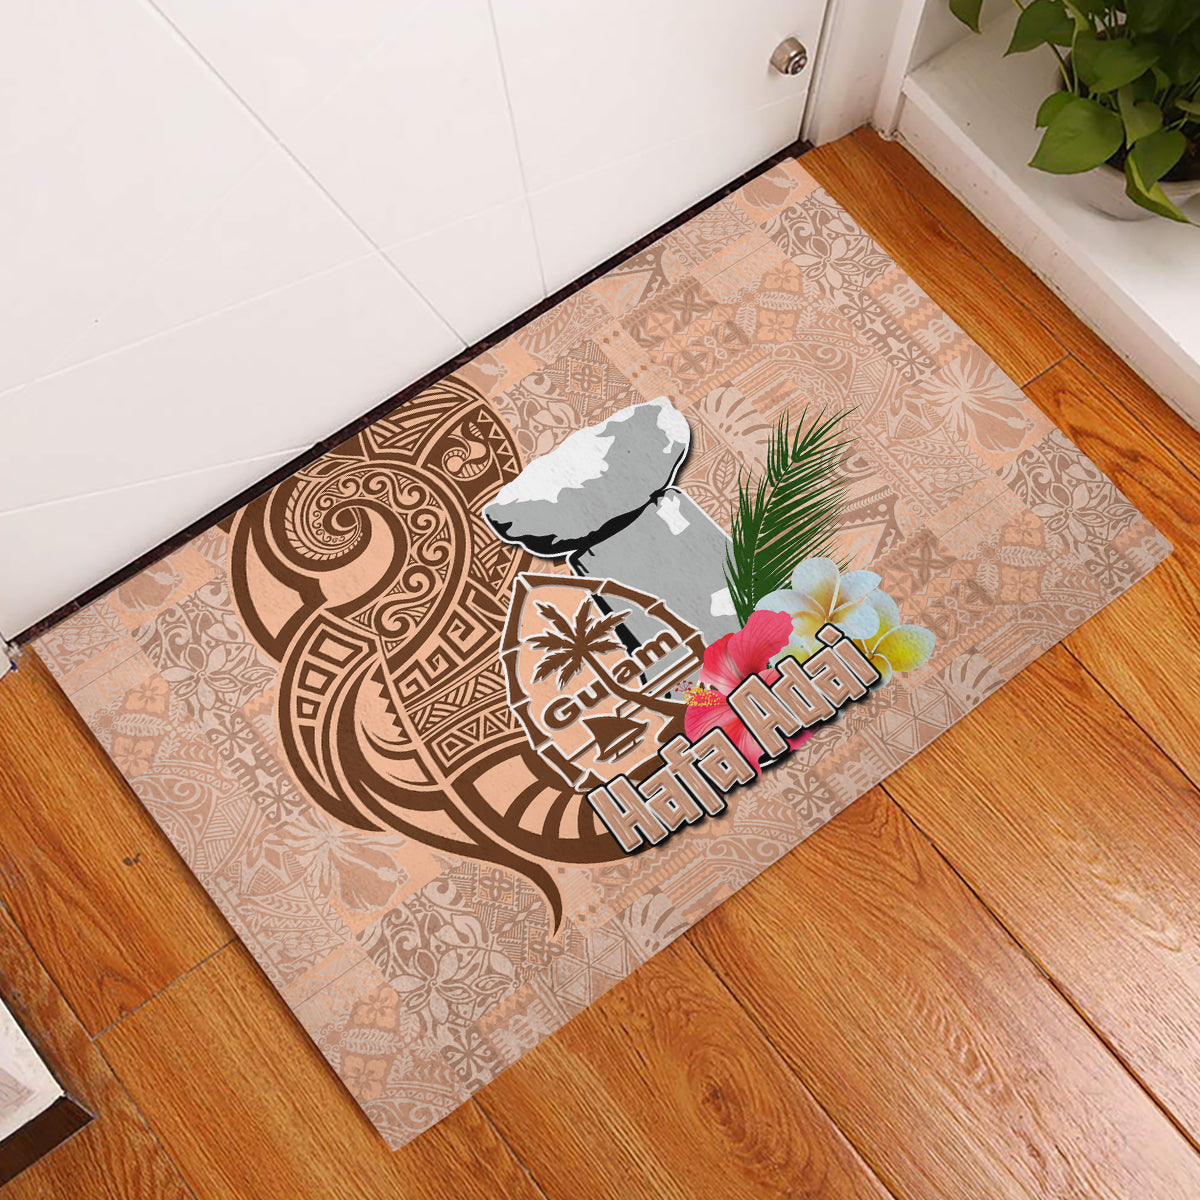 Guam Seal and Latte Stone With Ethnic Tapa Pattern Rubber Doormat Peach Fuzz Color LT03 Peach Fuzz - Polynesian Pride